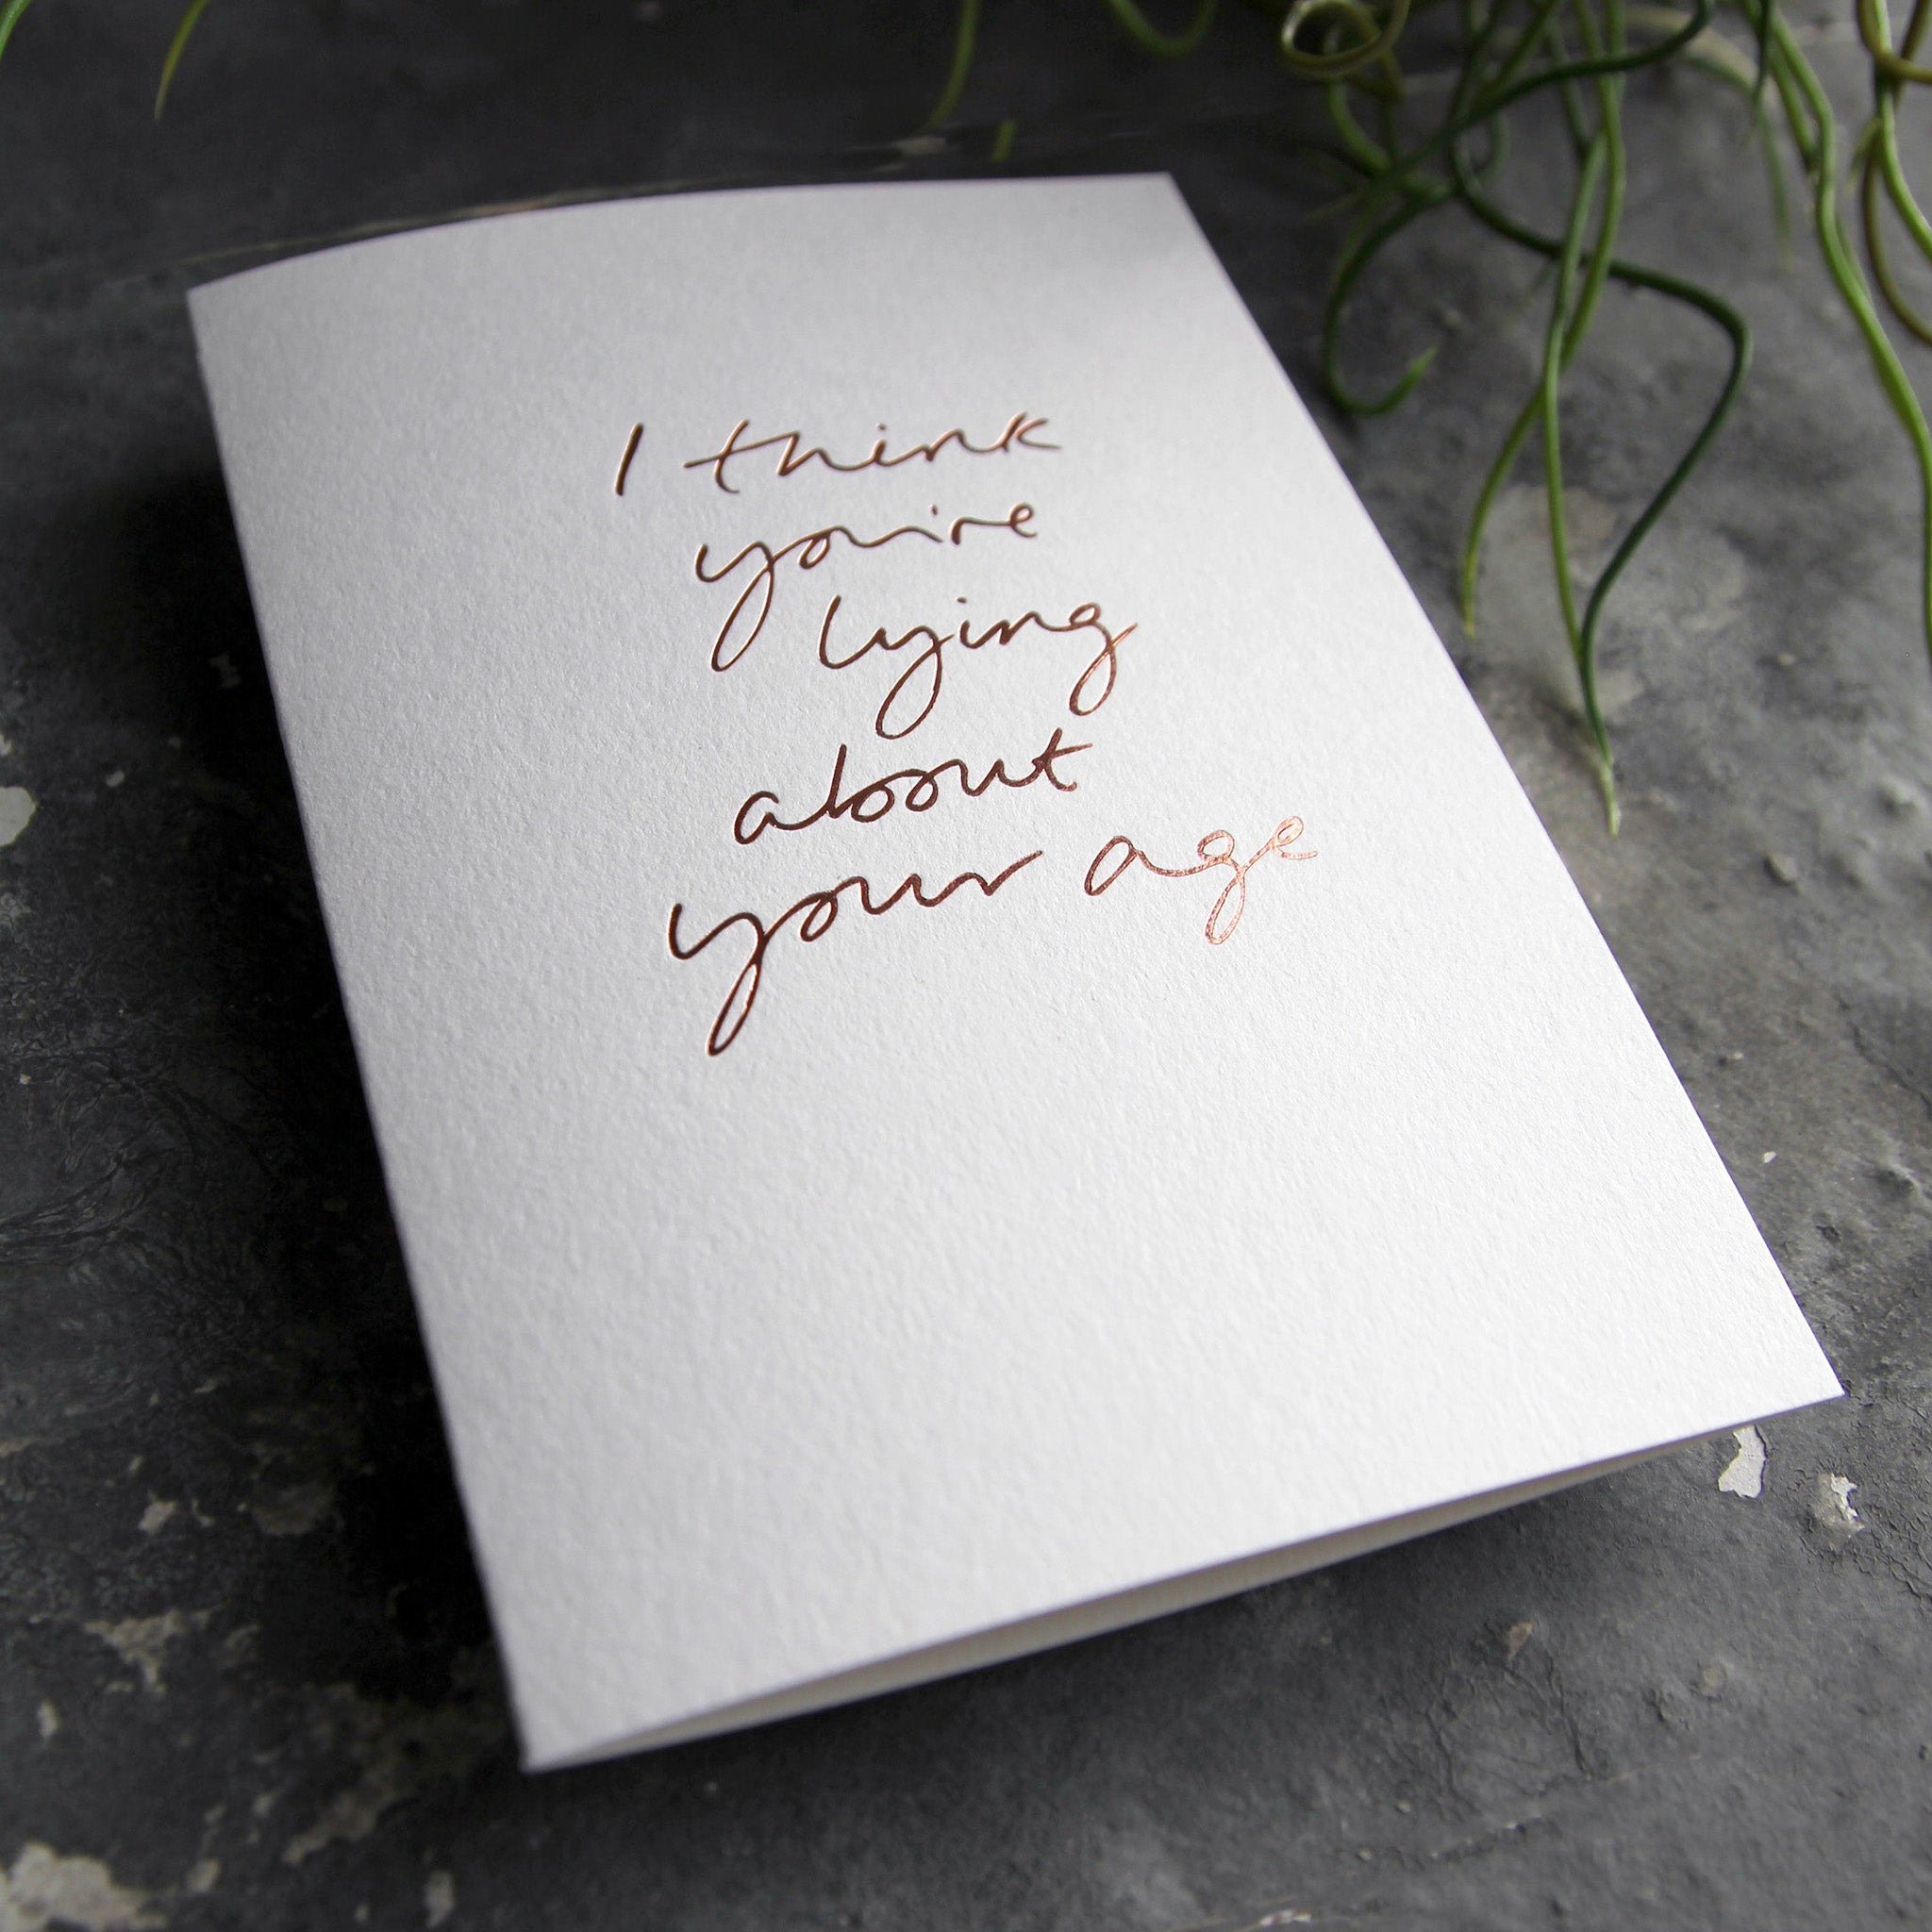 Luxury white greetings card with "I Think You're Lying About Your Age" handwritten in the front and hand printed in rose gold foil on a grey background with some green plant leaves at the side.